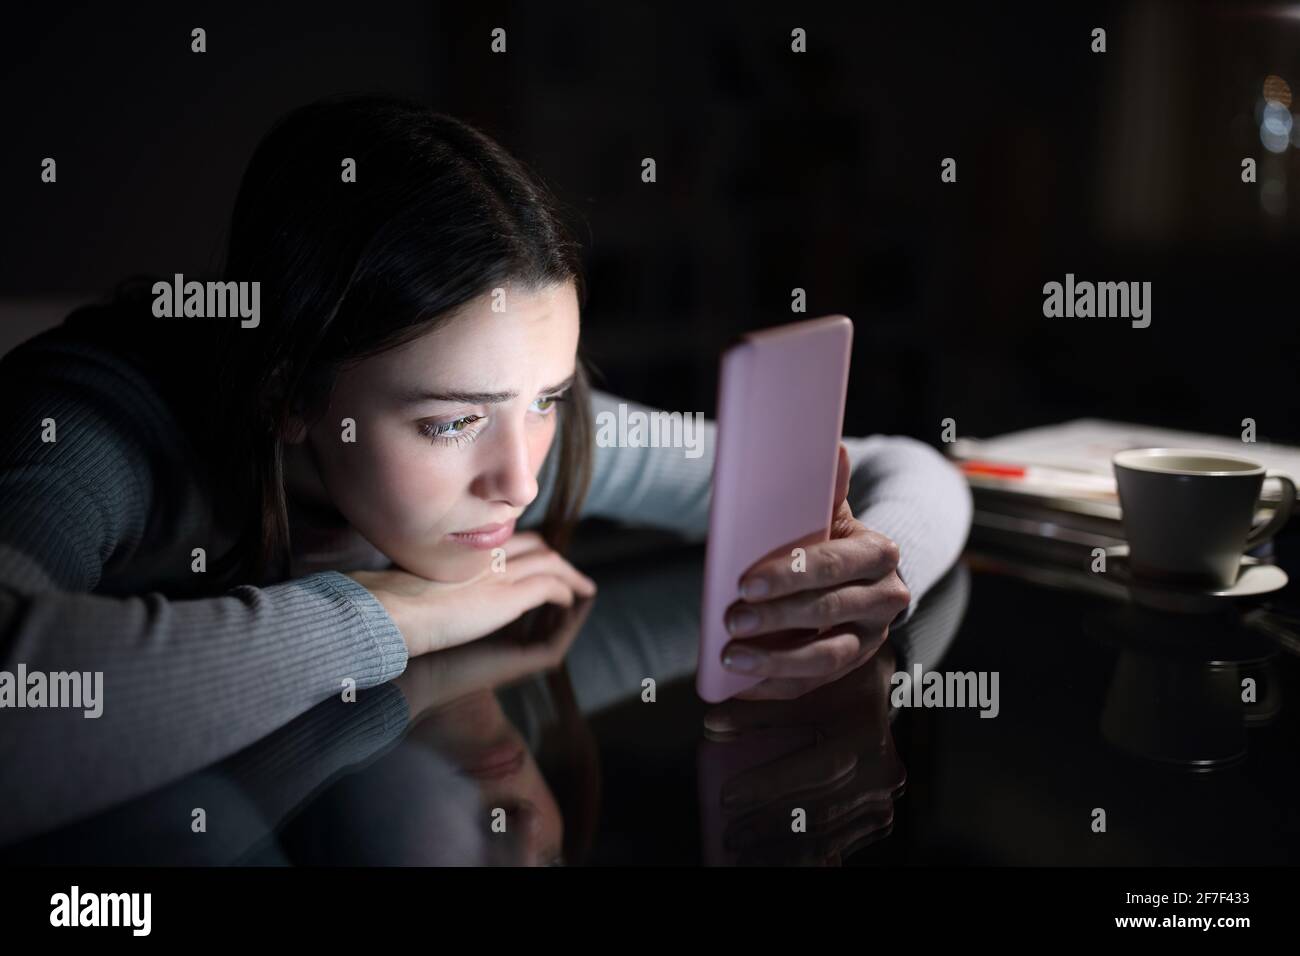 Sad female checking smart phone content in the dark night at home Stock Photo